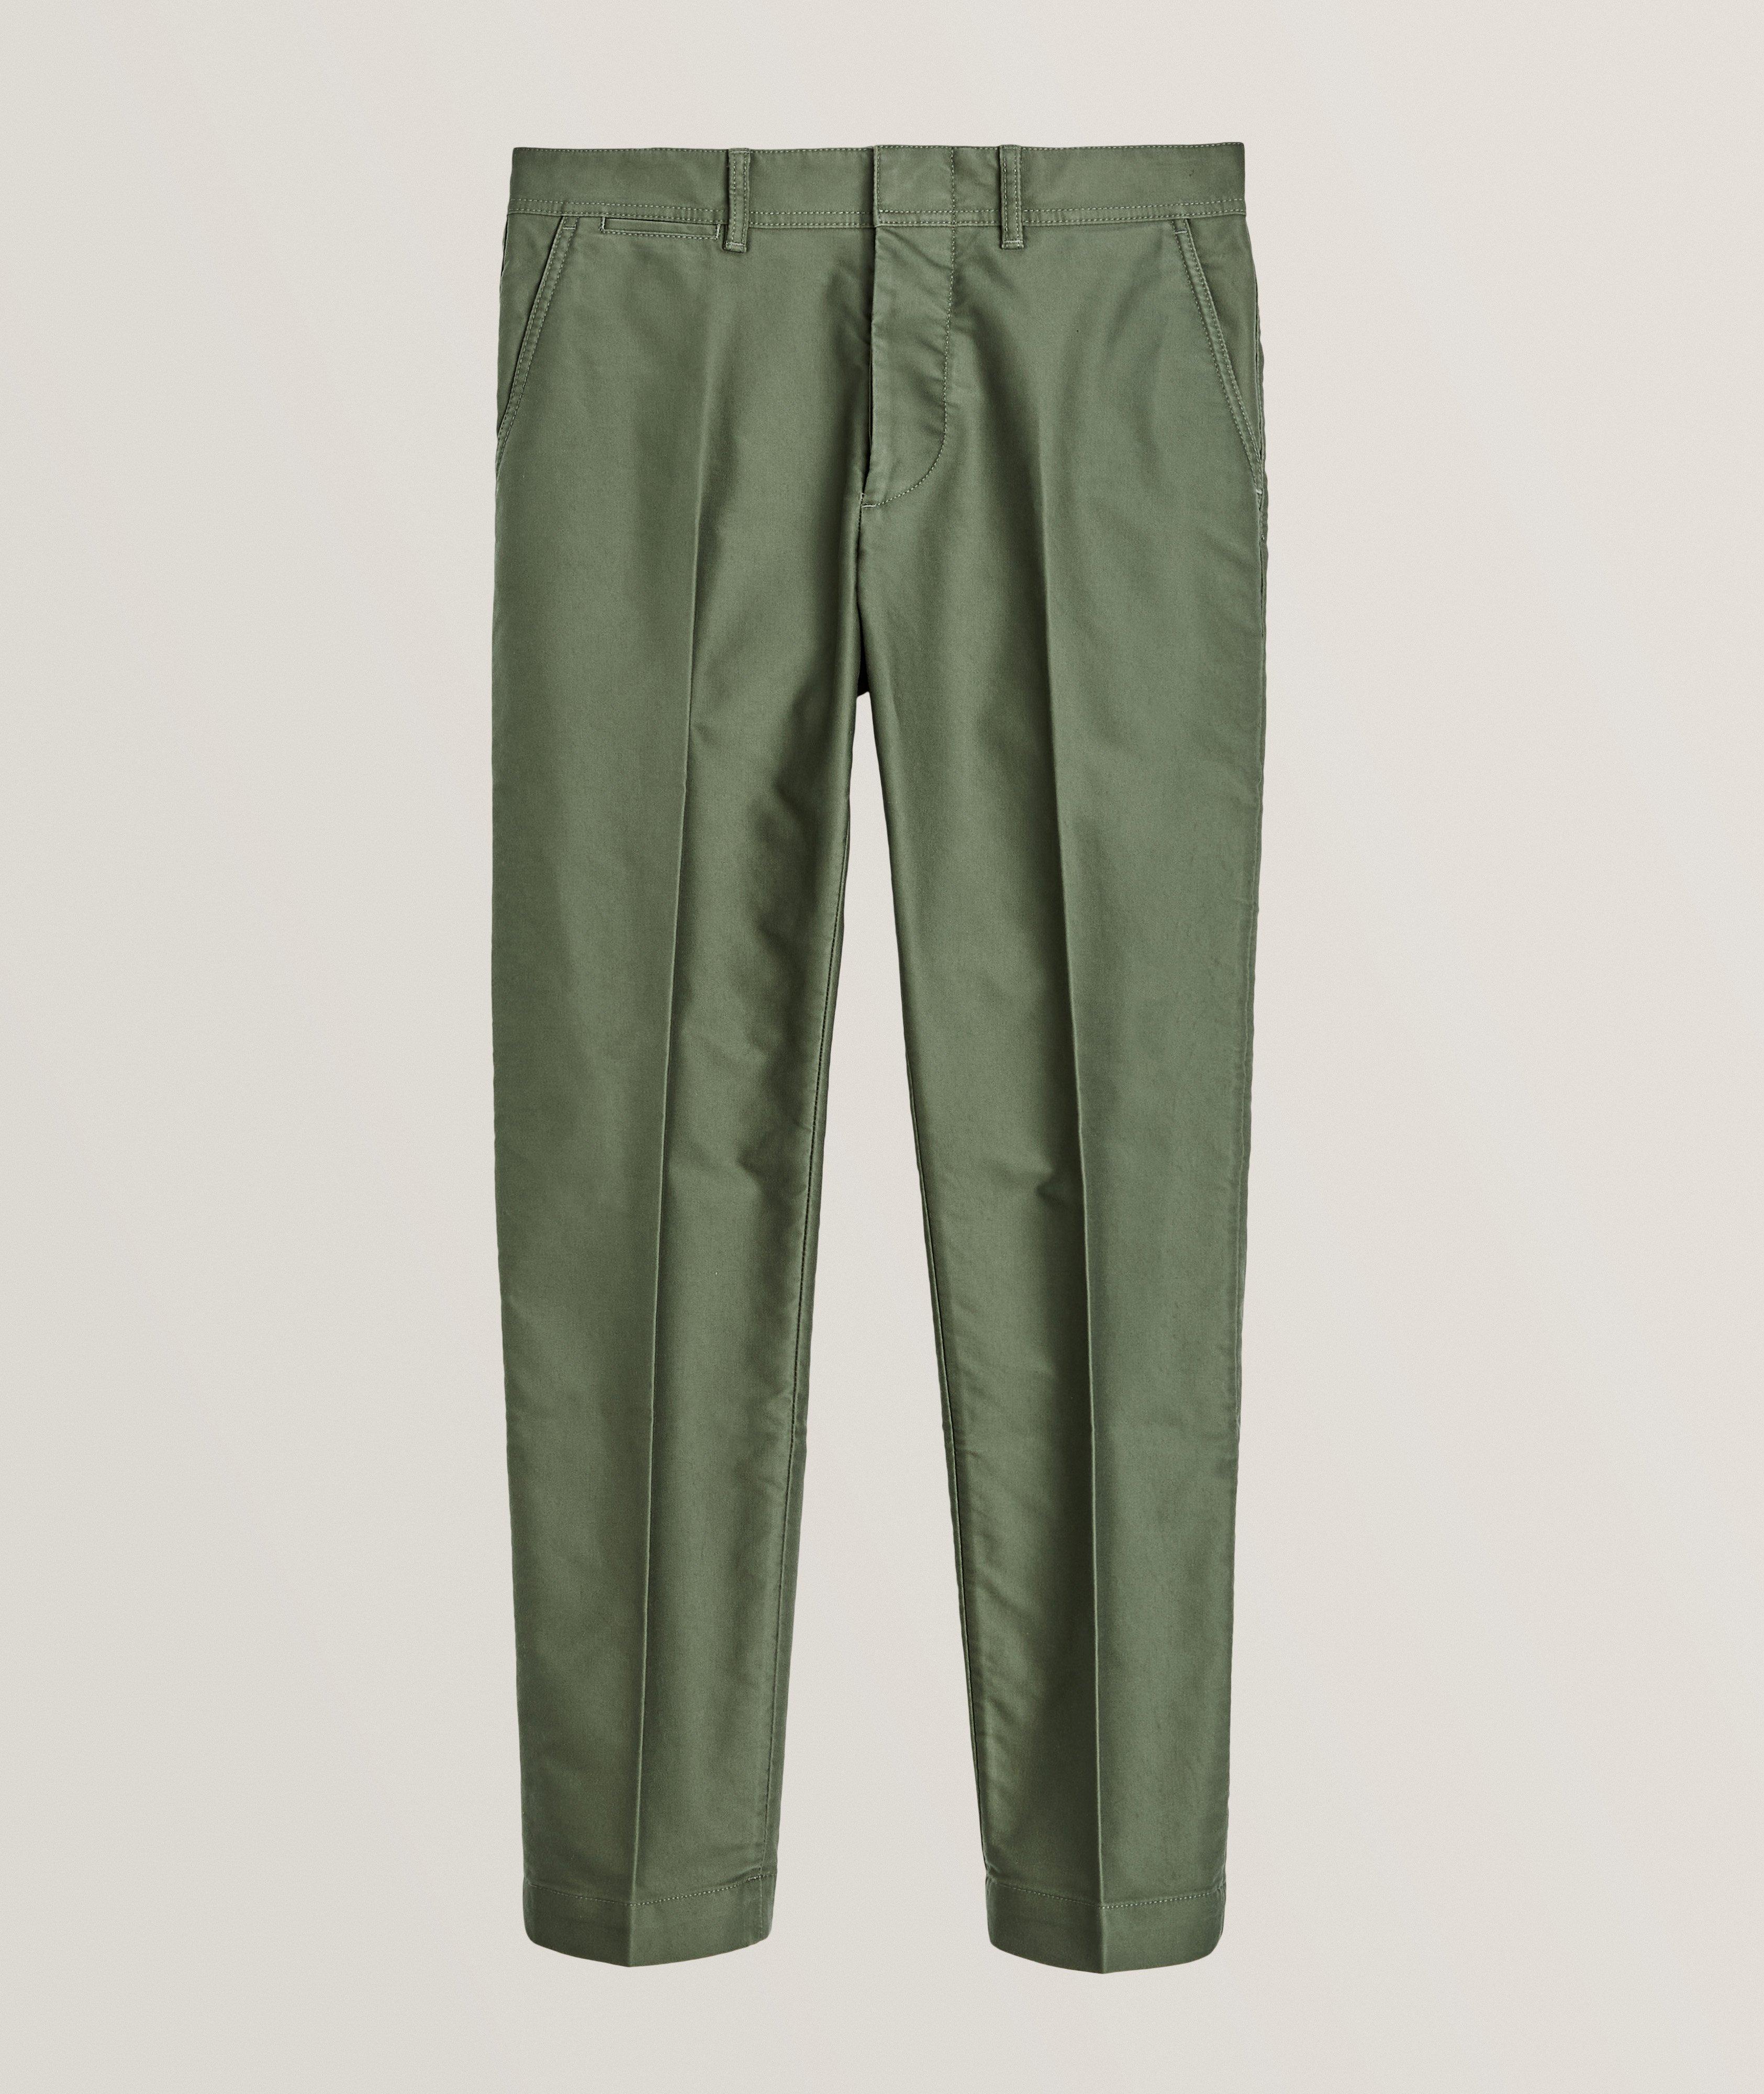 Military Pleated Cotton Chinos